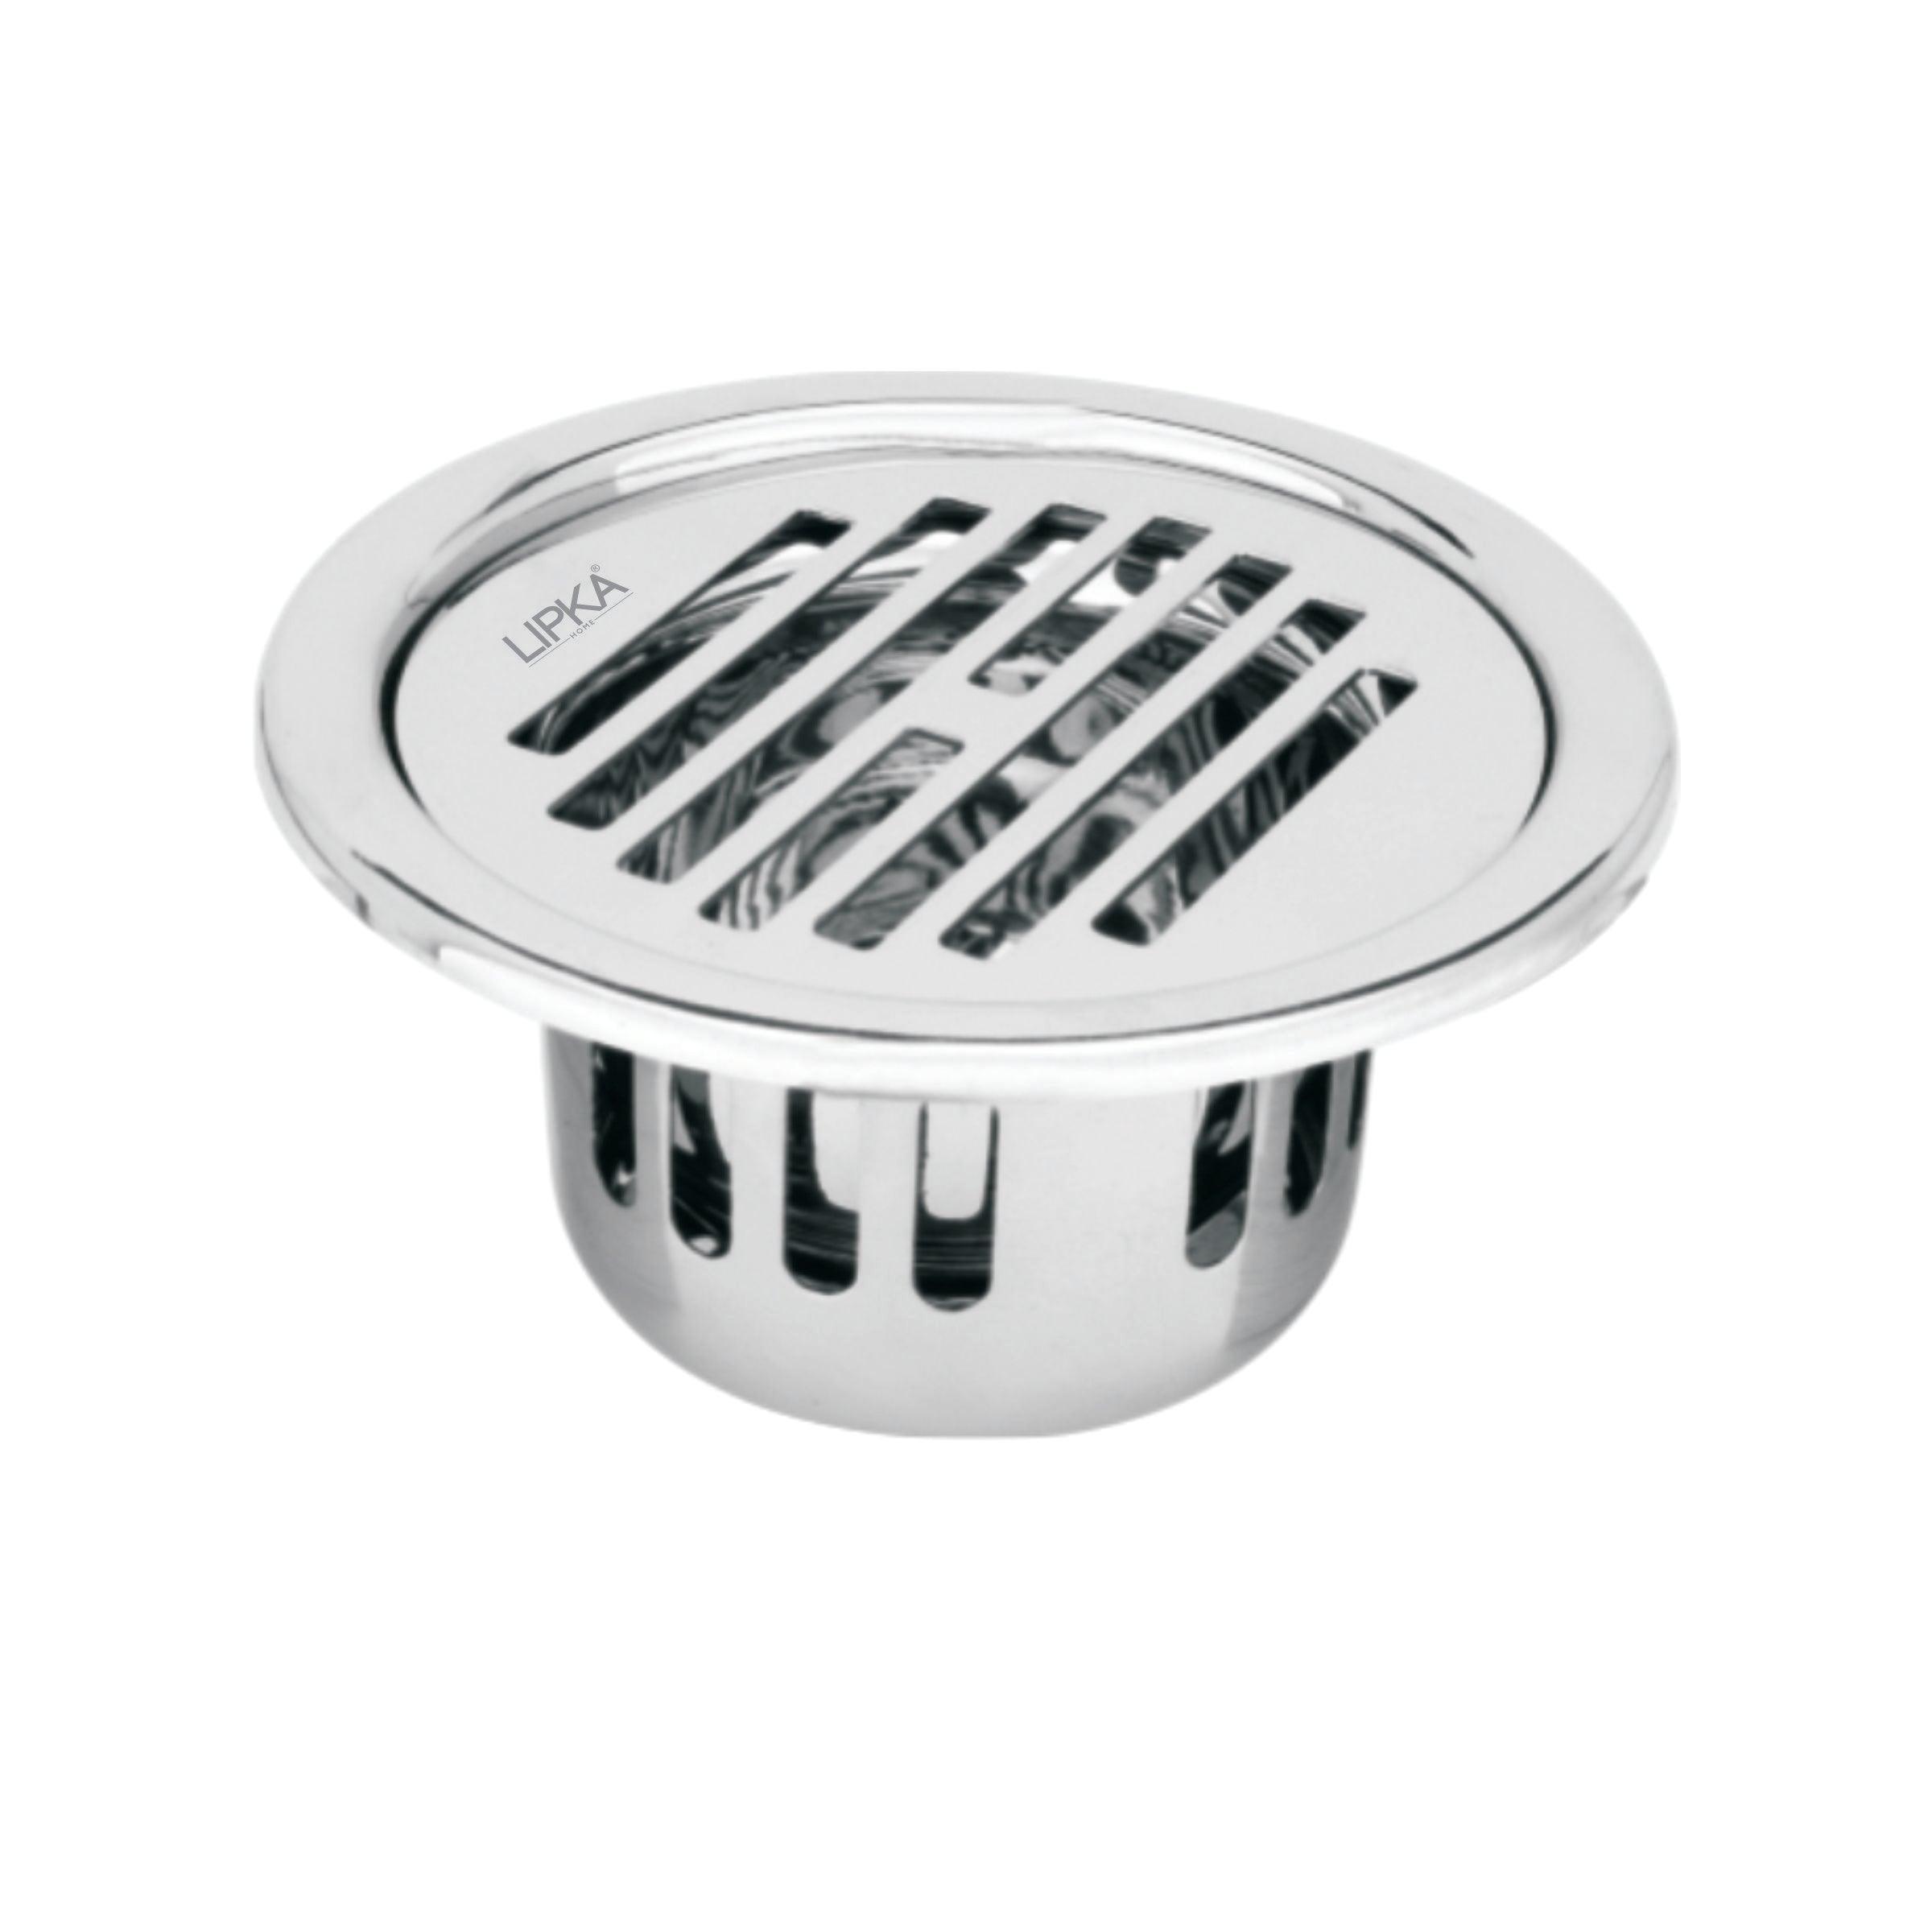 Golden Classic Jali Round Floor Drain (4 Inches) with Cockroach Trap